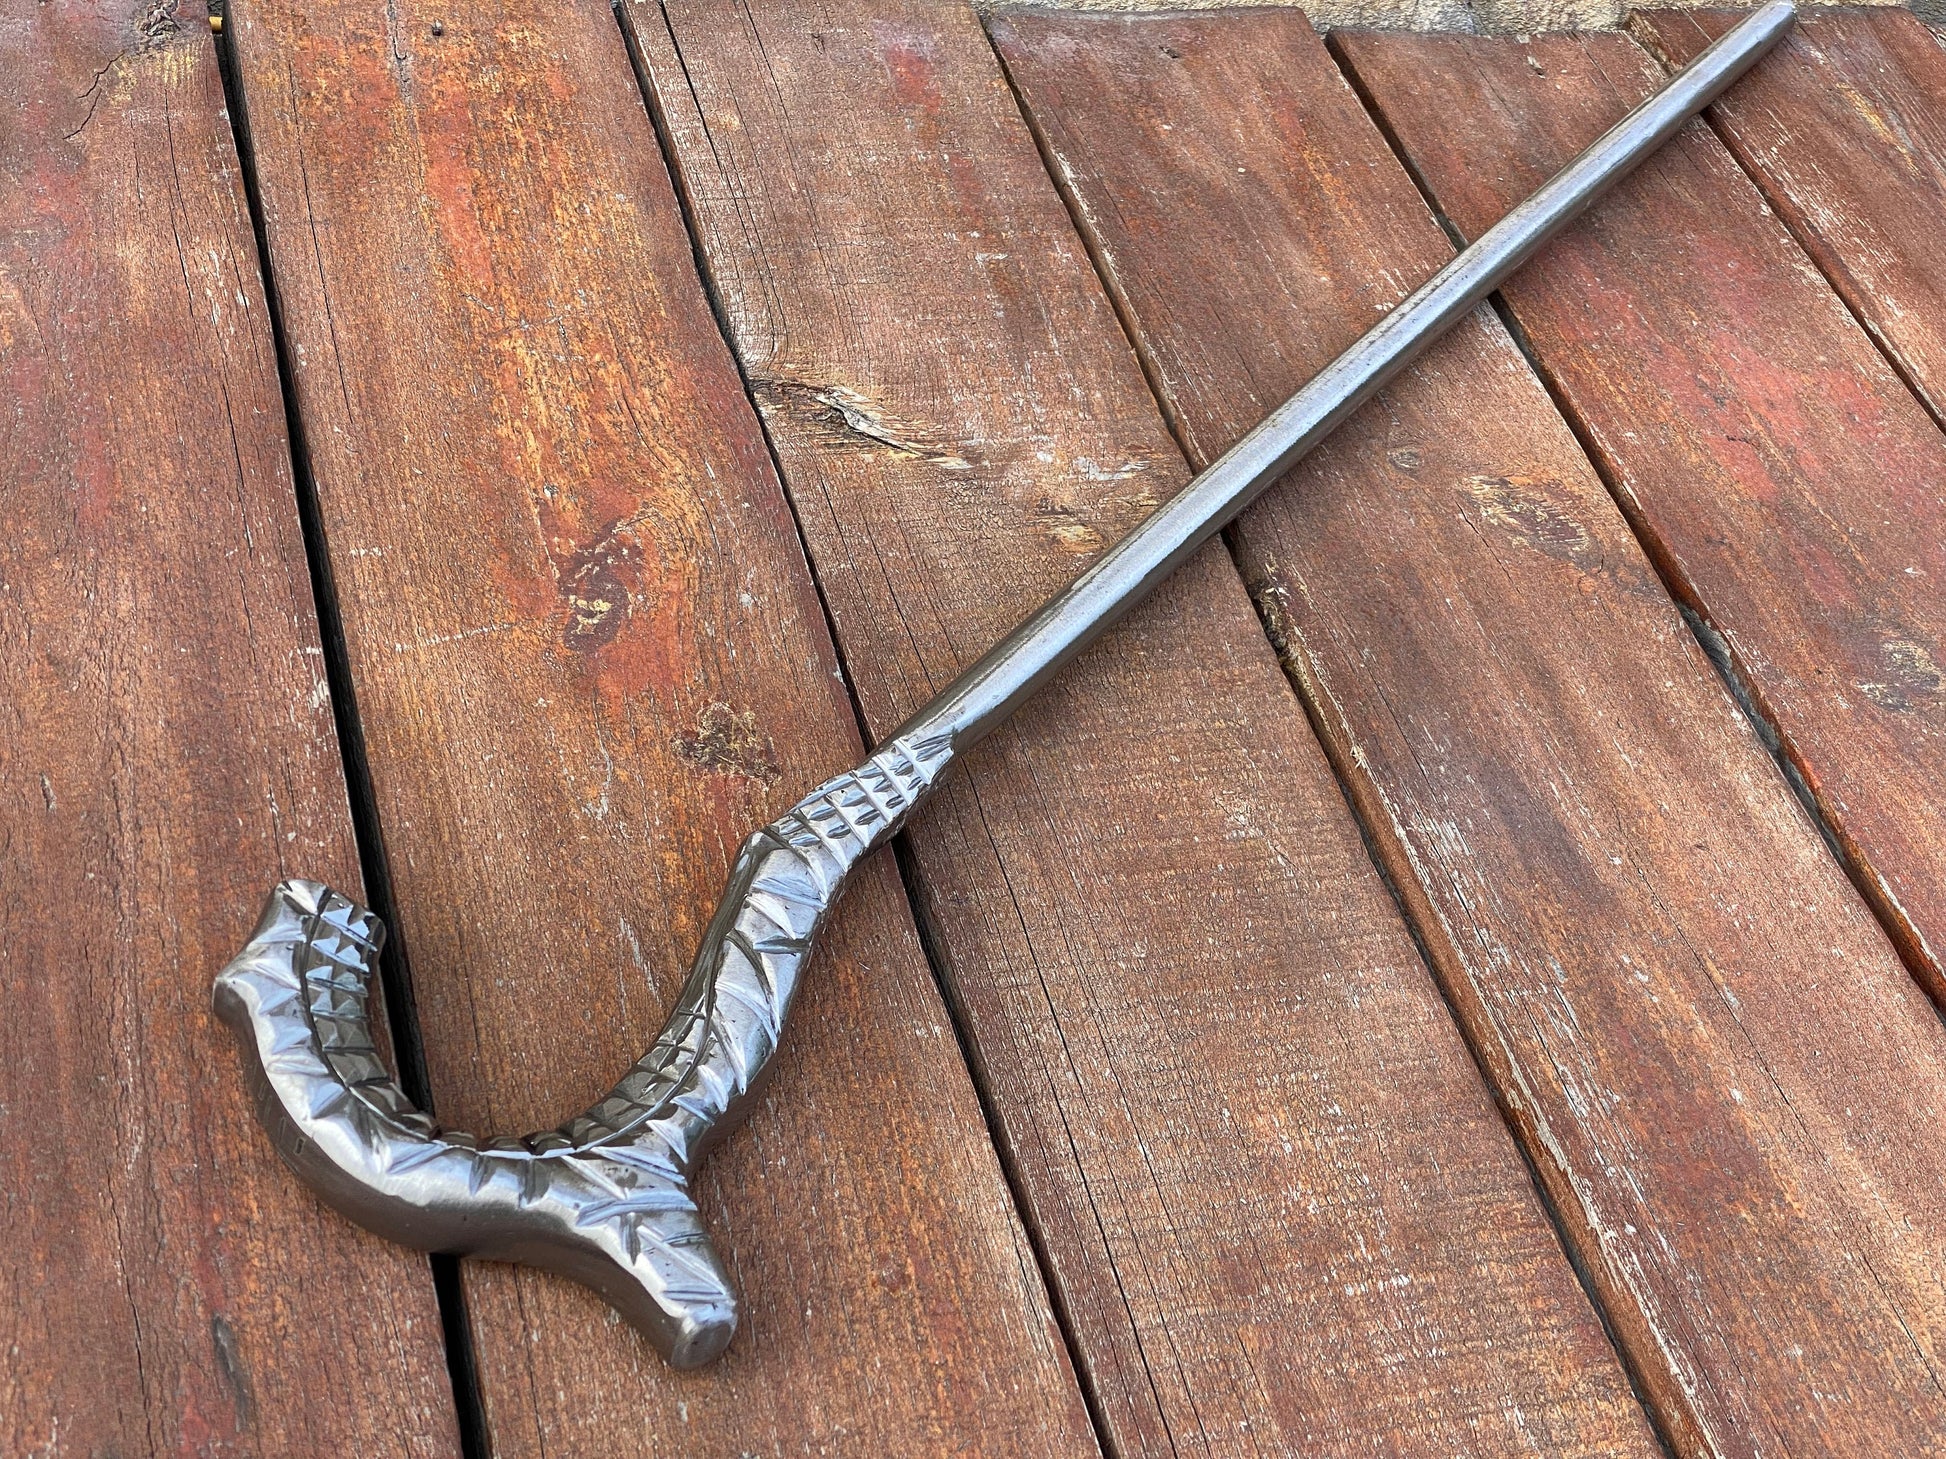 Cane, walking cane, walking stick, personalized cane, birthday, Christmas, anniversary, retirement gift, pension, stave, traveling, grandpa